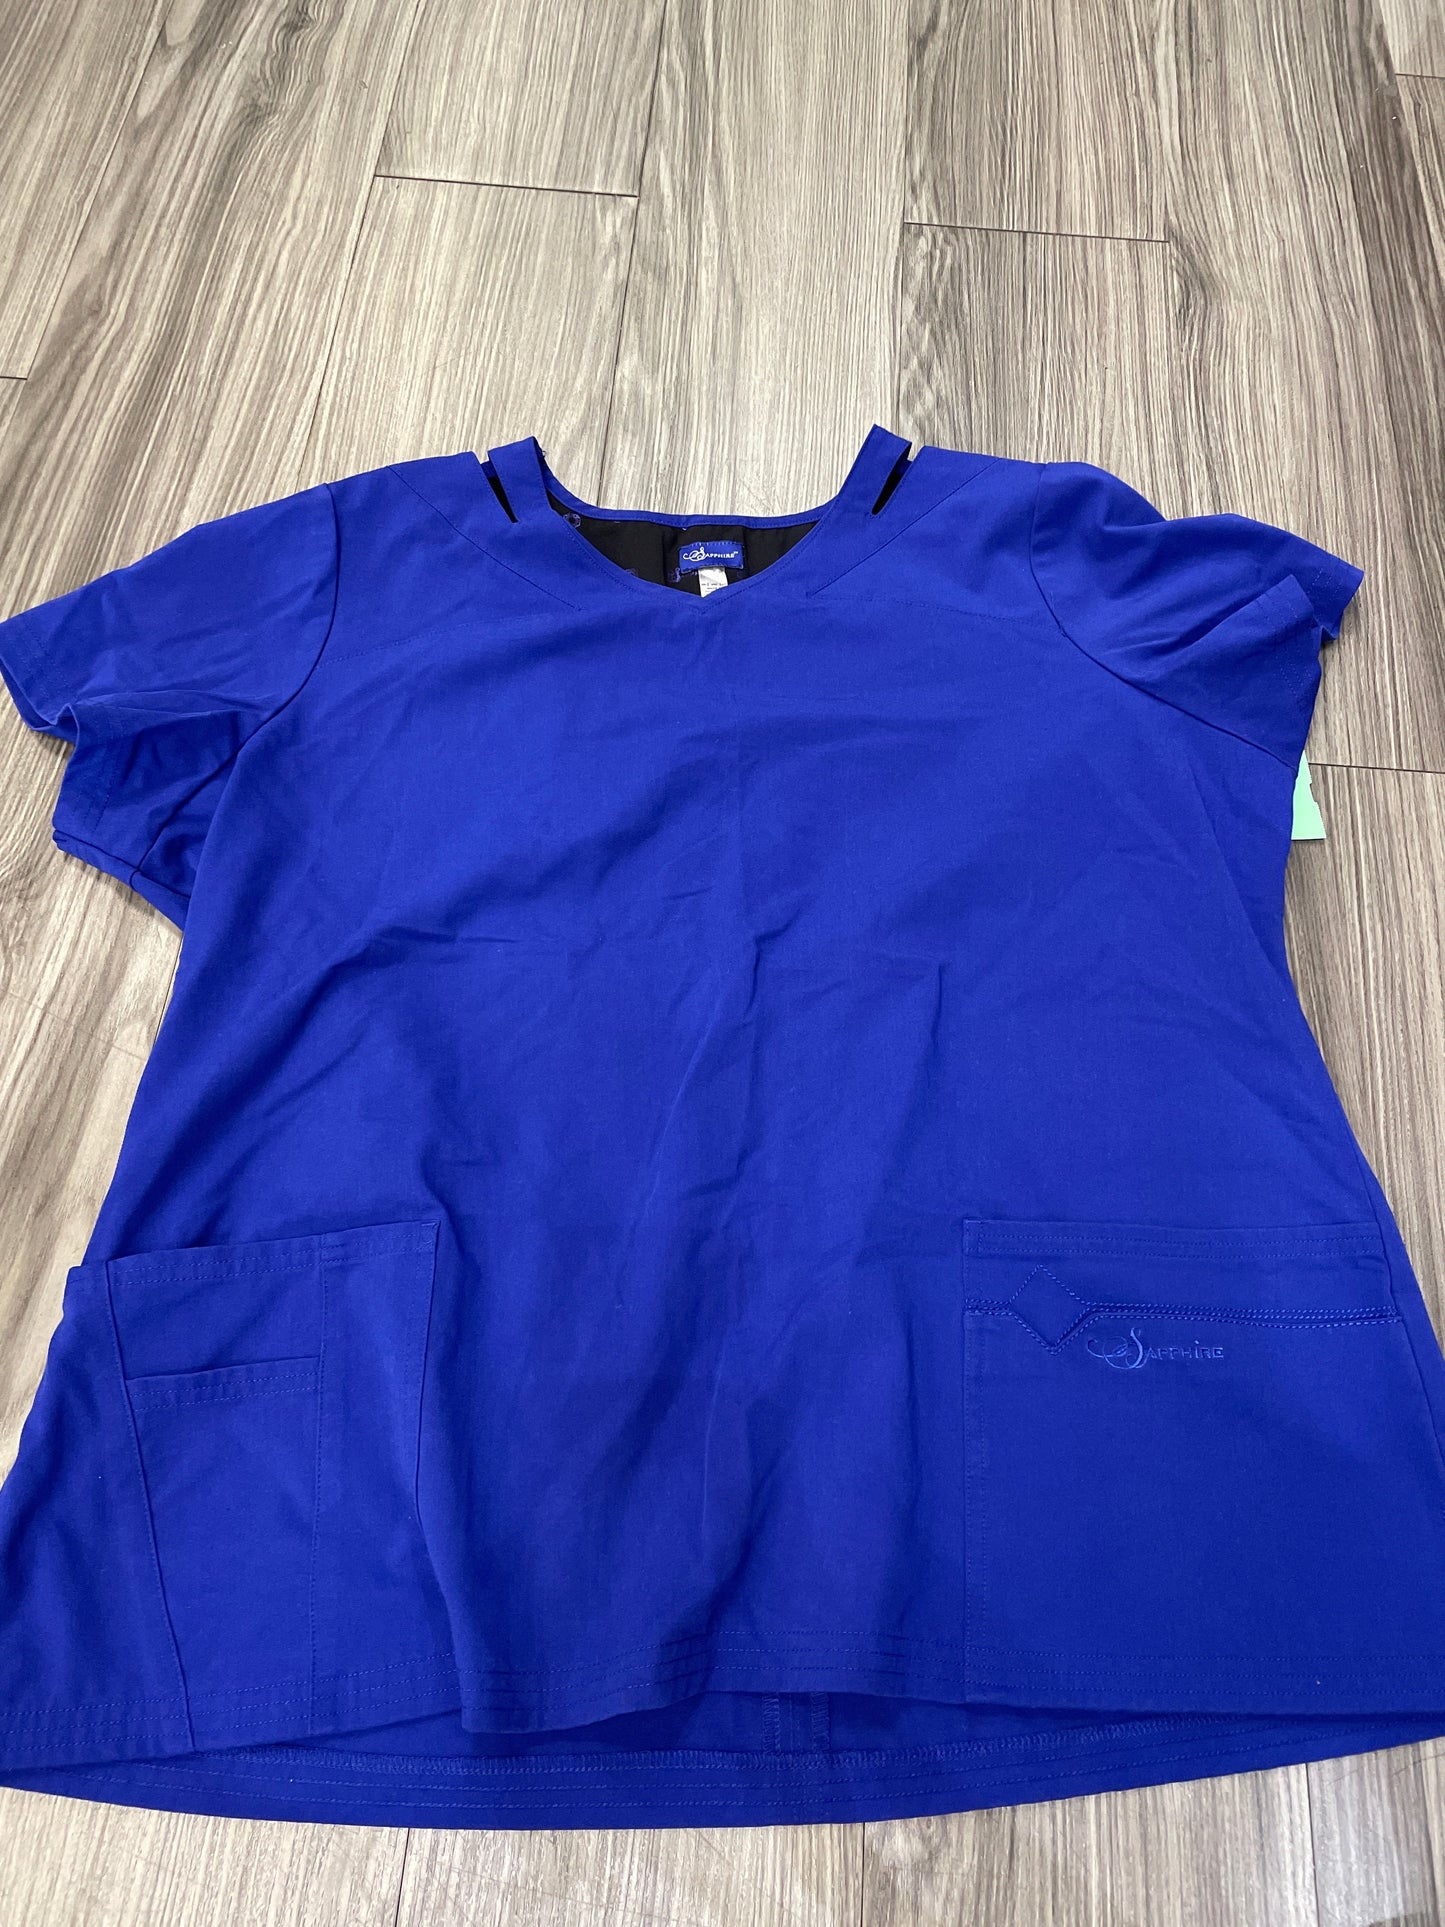 Blue Top Short Sleeve Clothes Mentor, Size 2x